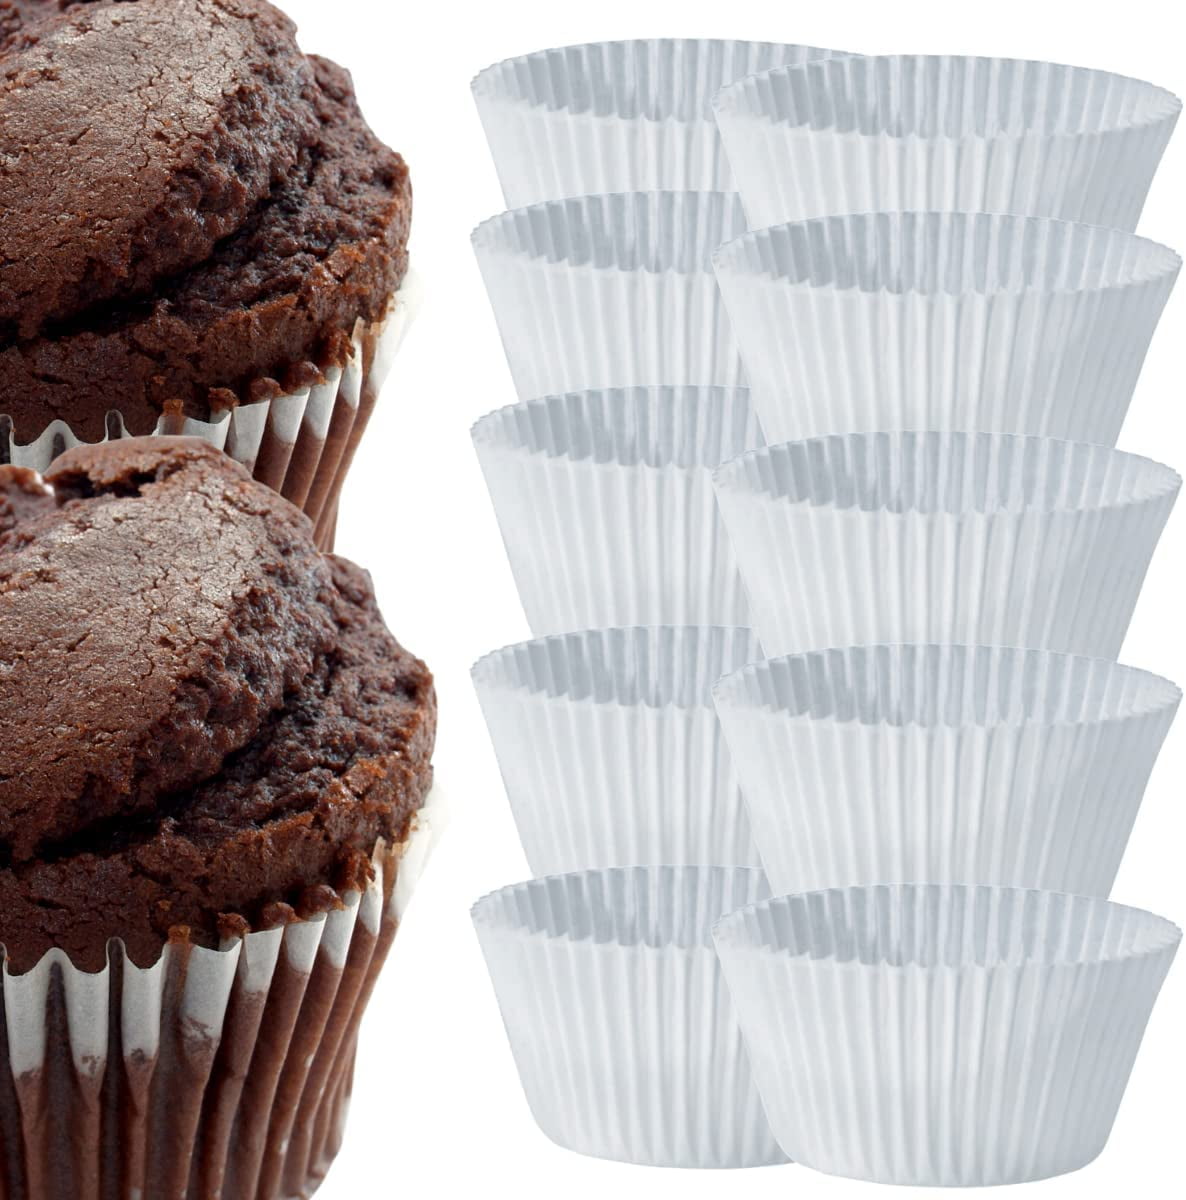 Norpro Giant Muffin Cups (48 Count) - Walmart.com